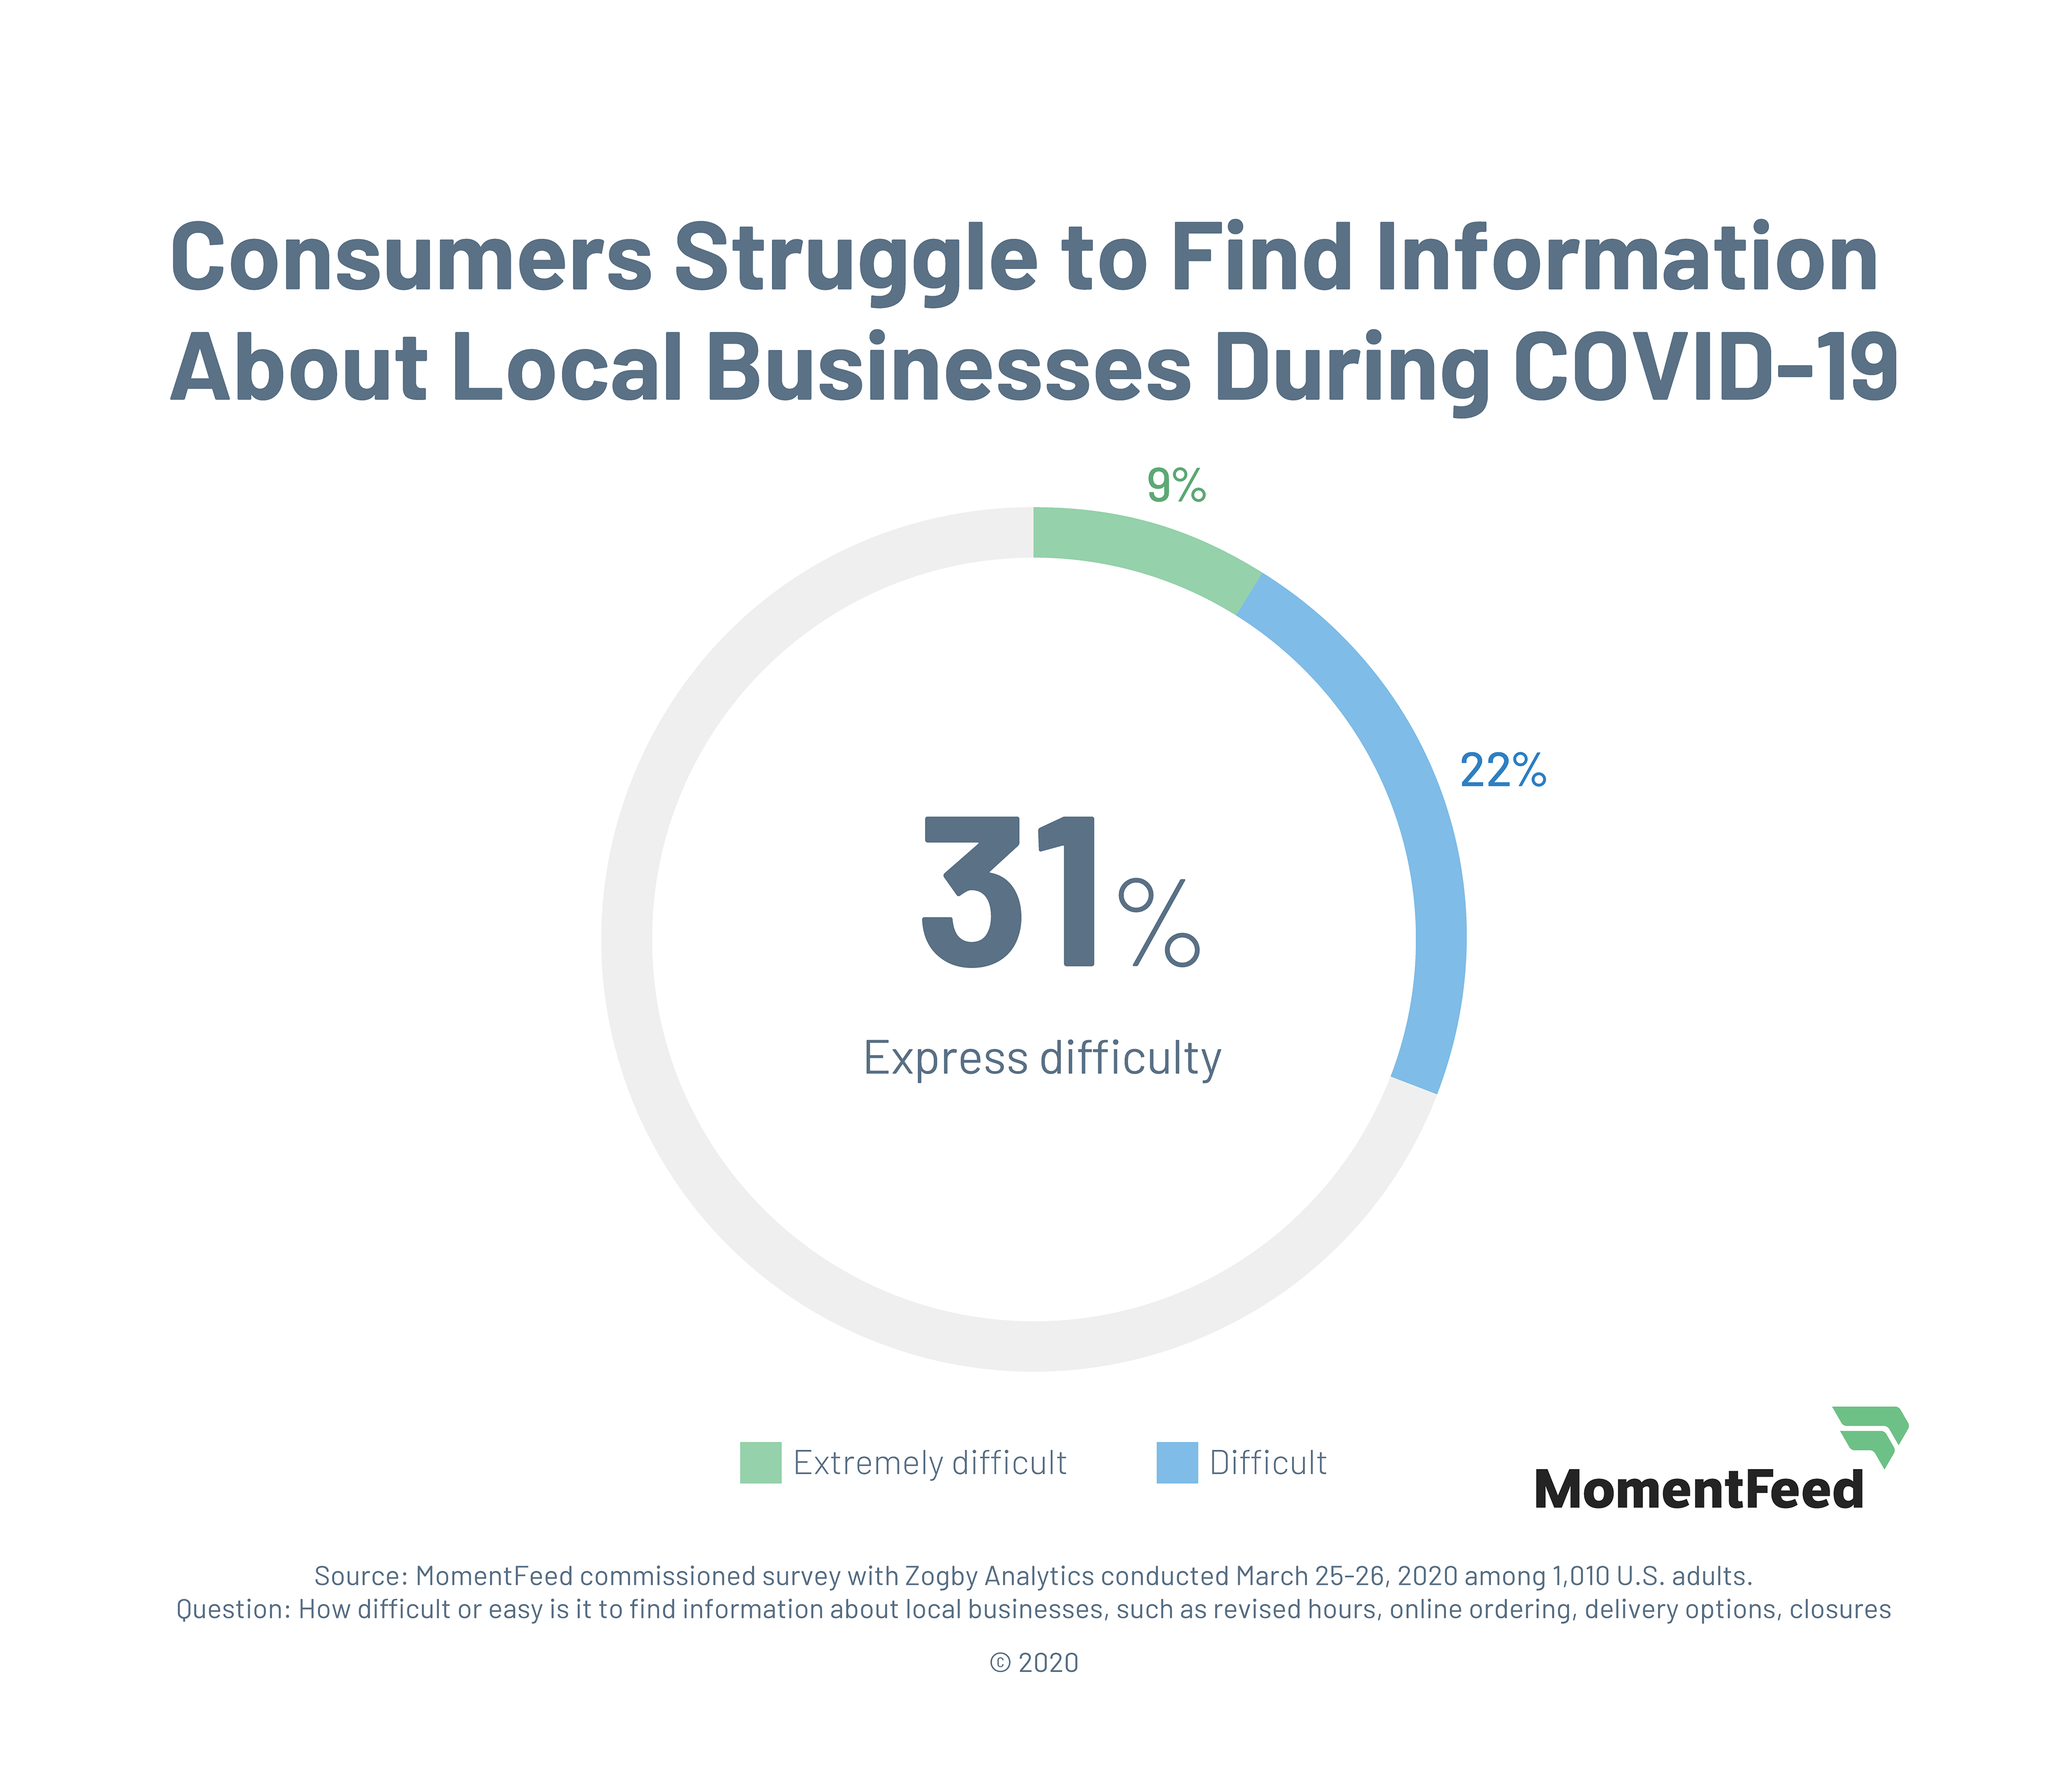 MomentFeed survey finds 31% of respondents are having trouble finding information about local businesses during COVID-19.